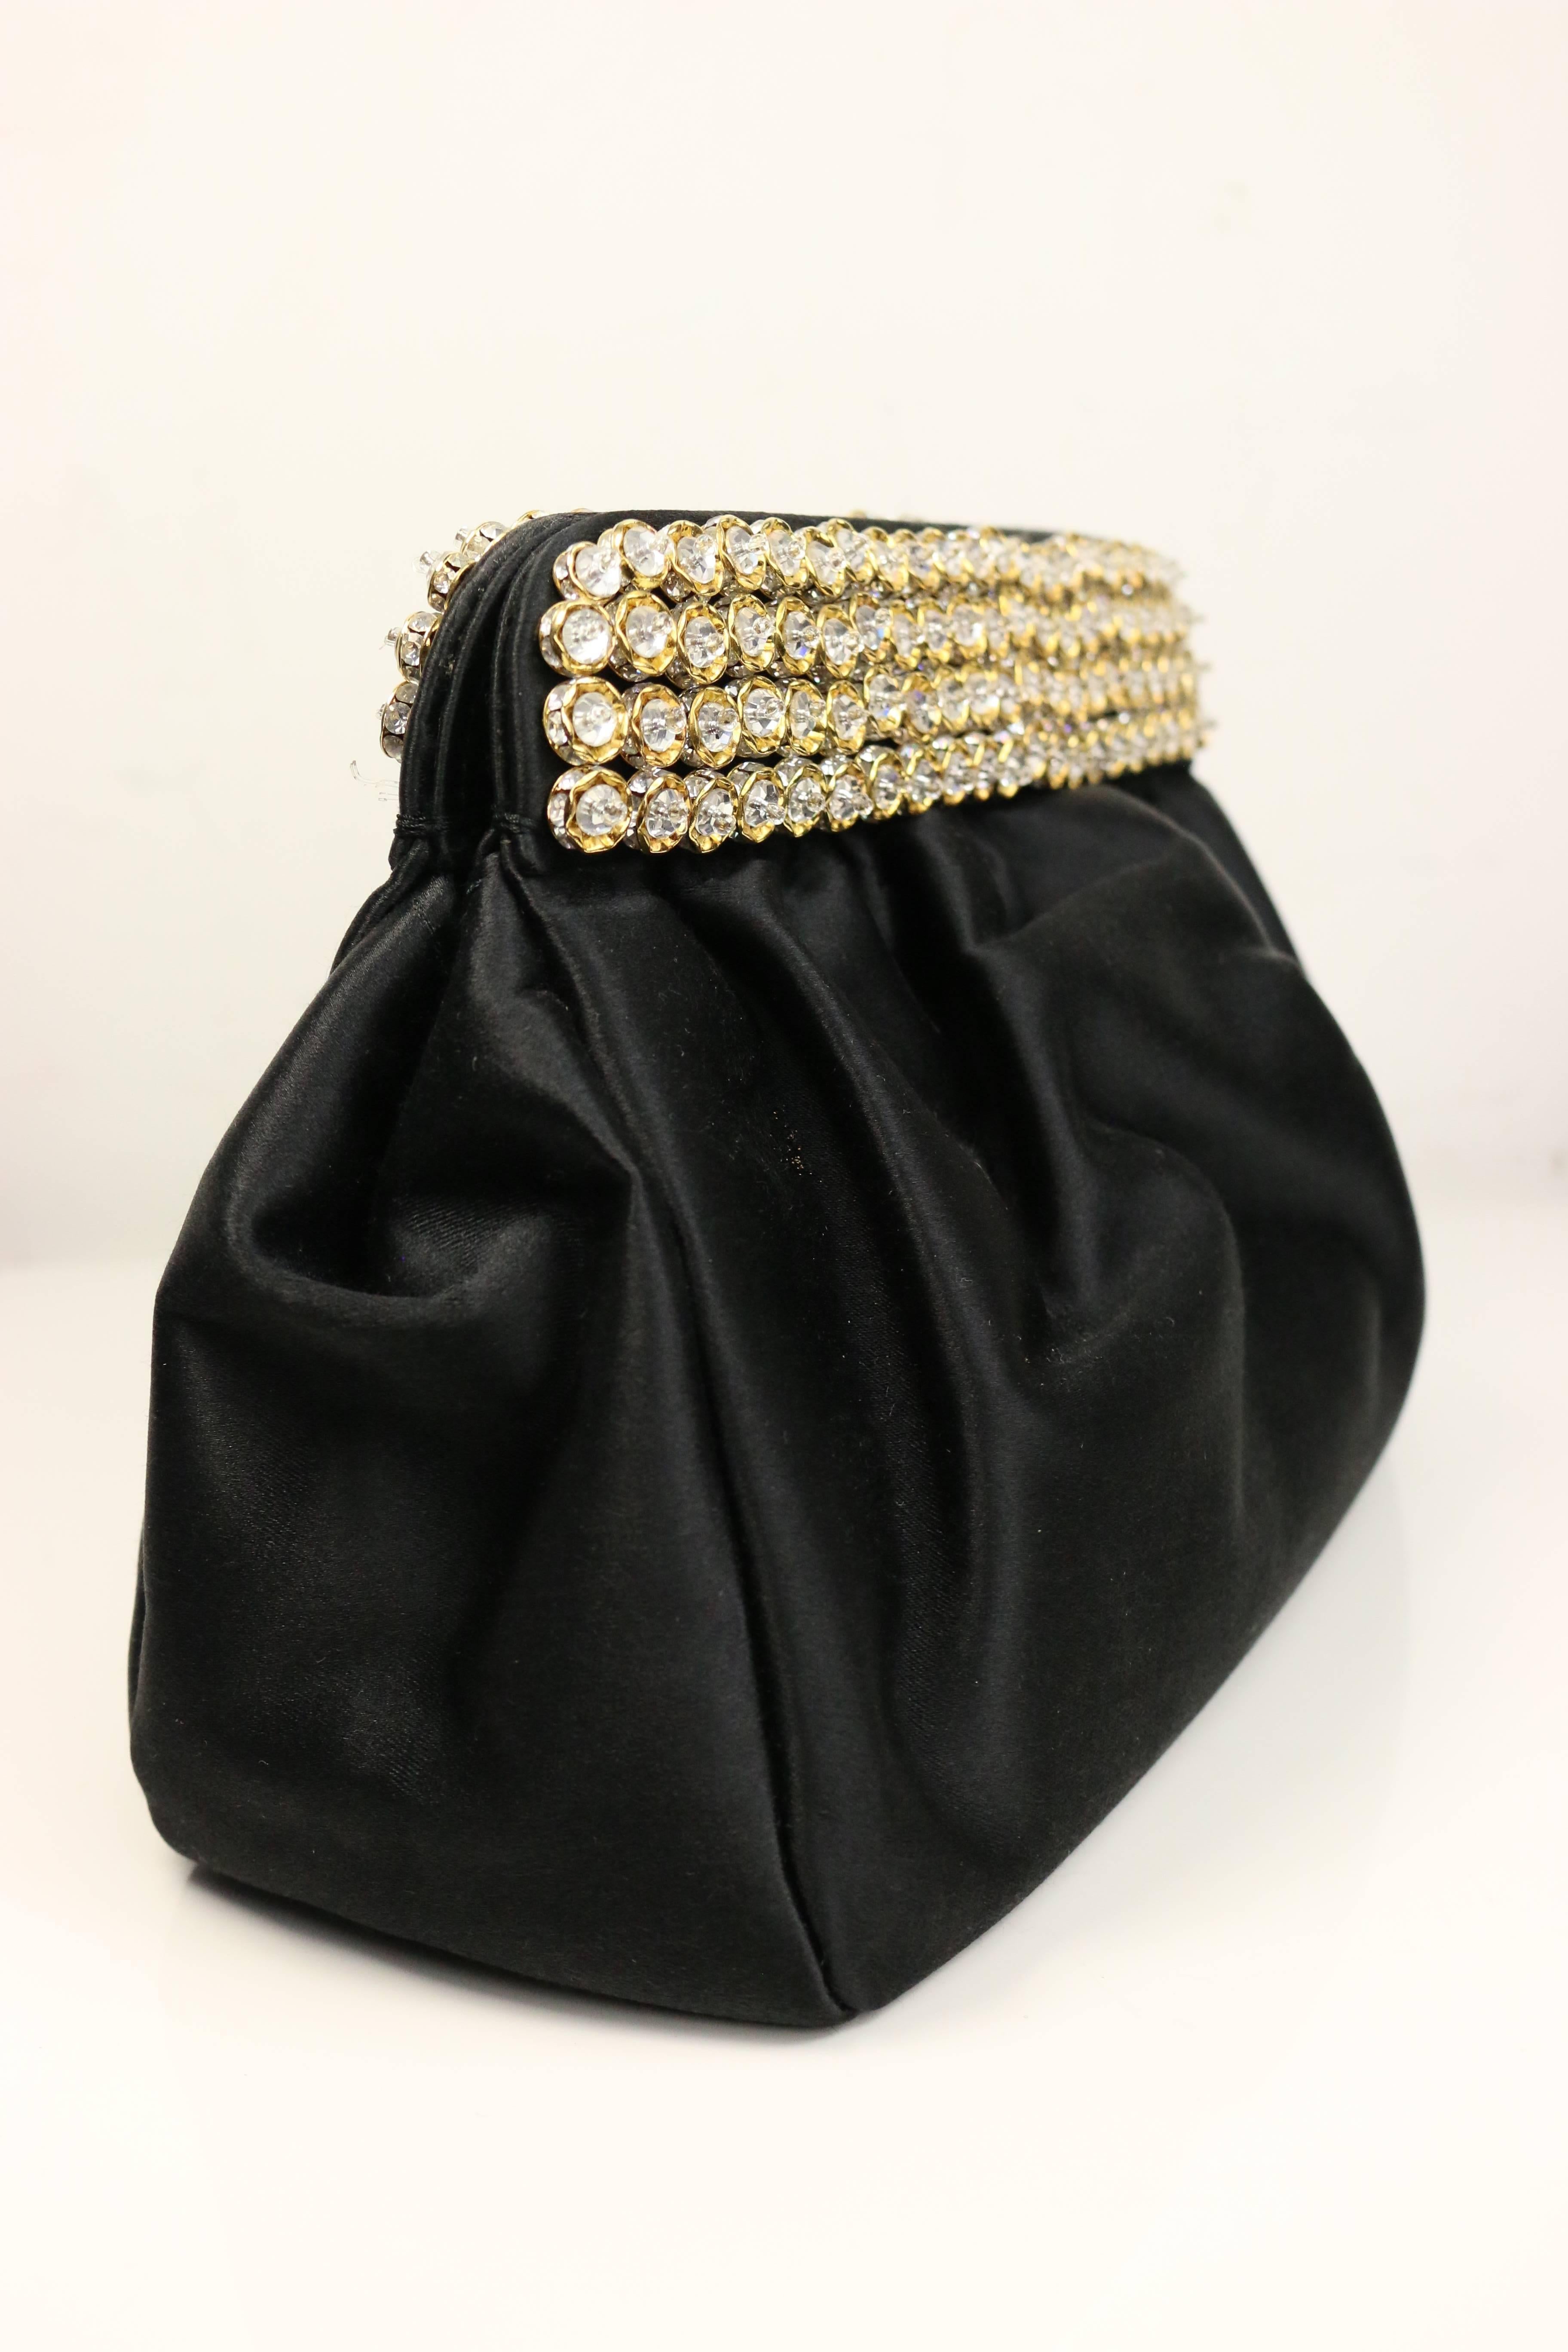 - Vintage 80s Casadei black satin gold toned crystal rhinestones evening clutch. 
This beautiful clutch has a satin strap which can be used as a crossbody bag as well!!! The glamours, elegant and bold are all in one in this bag that represents the